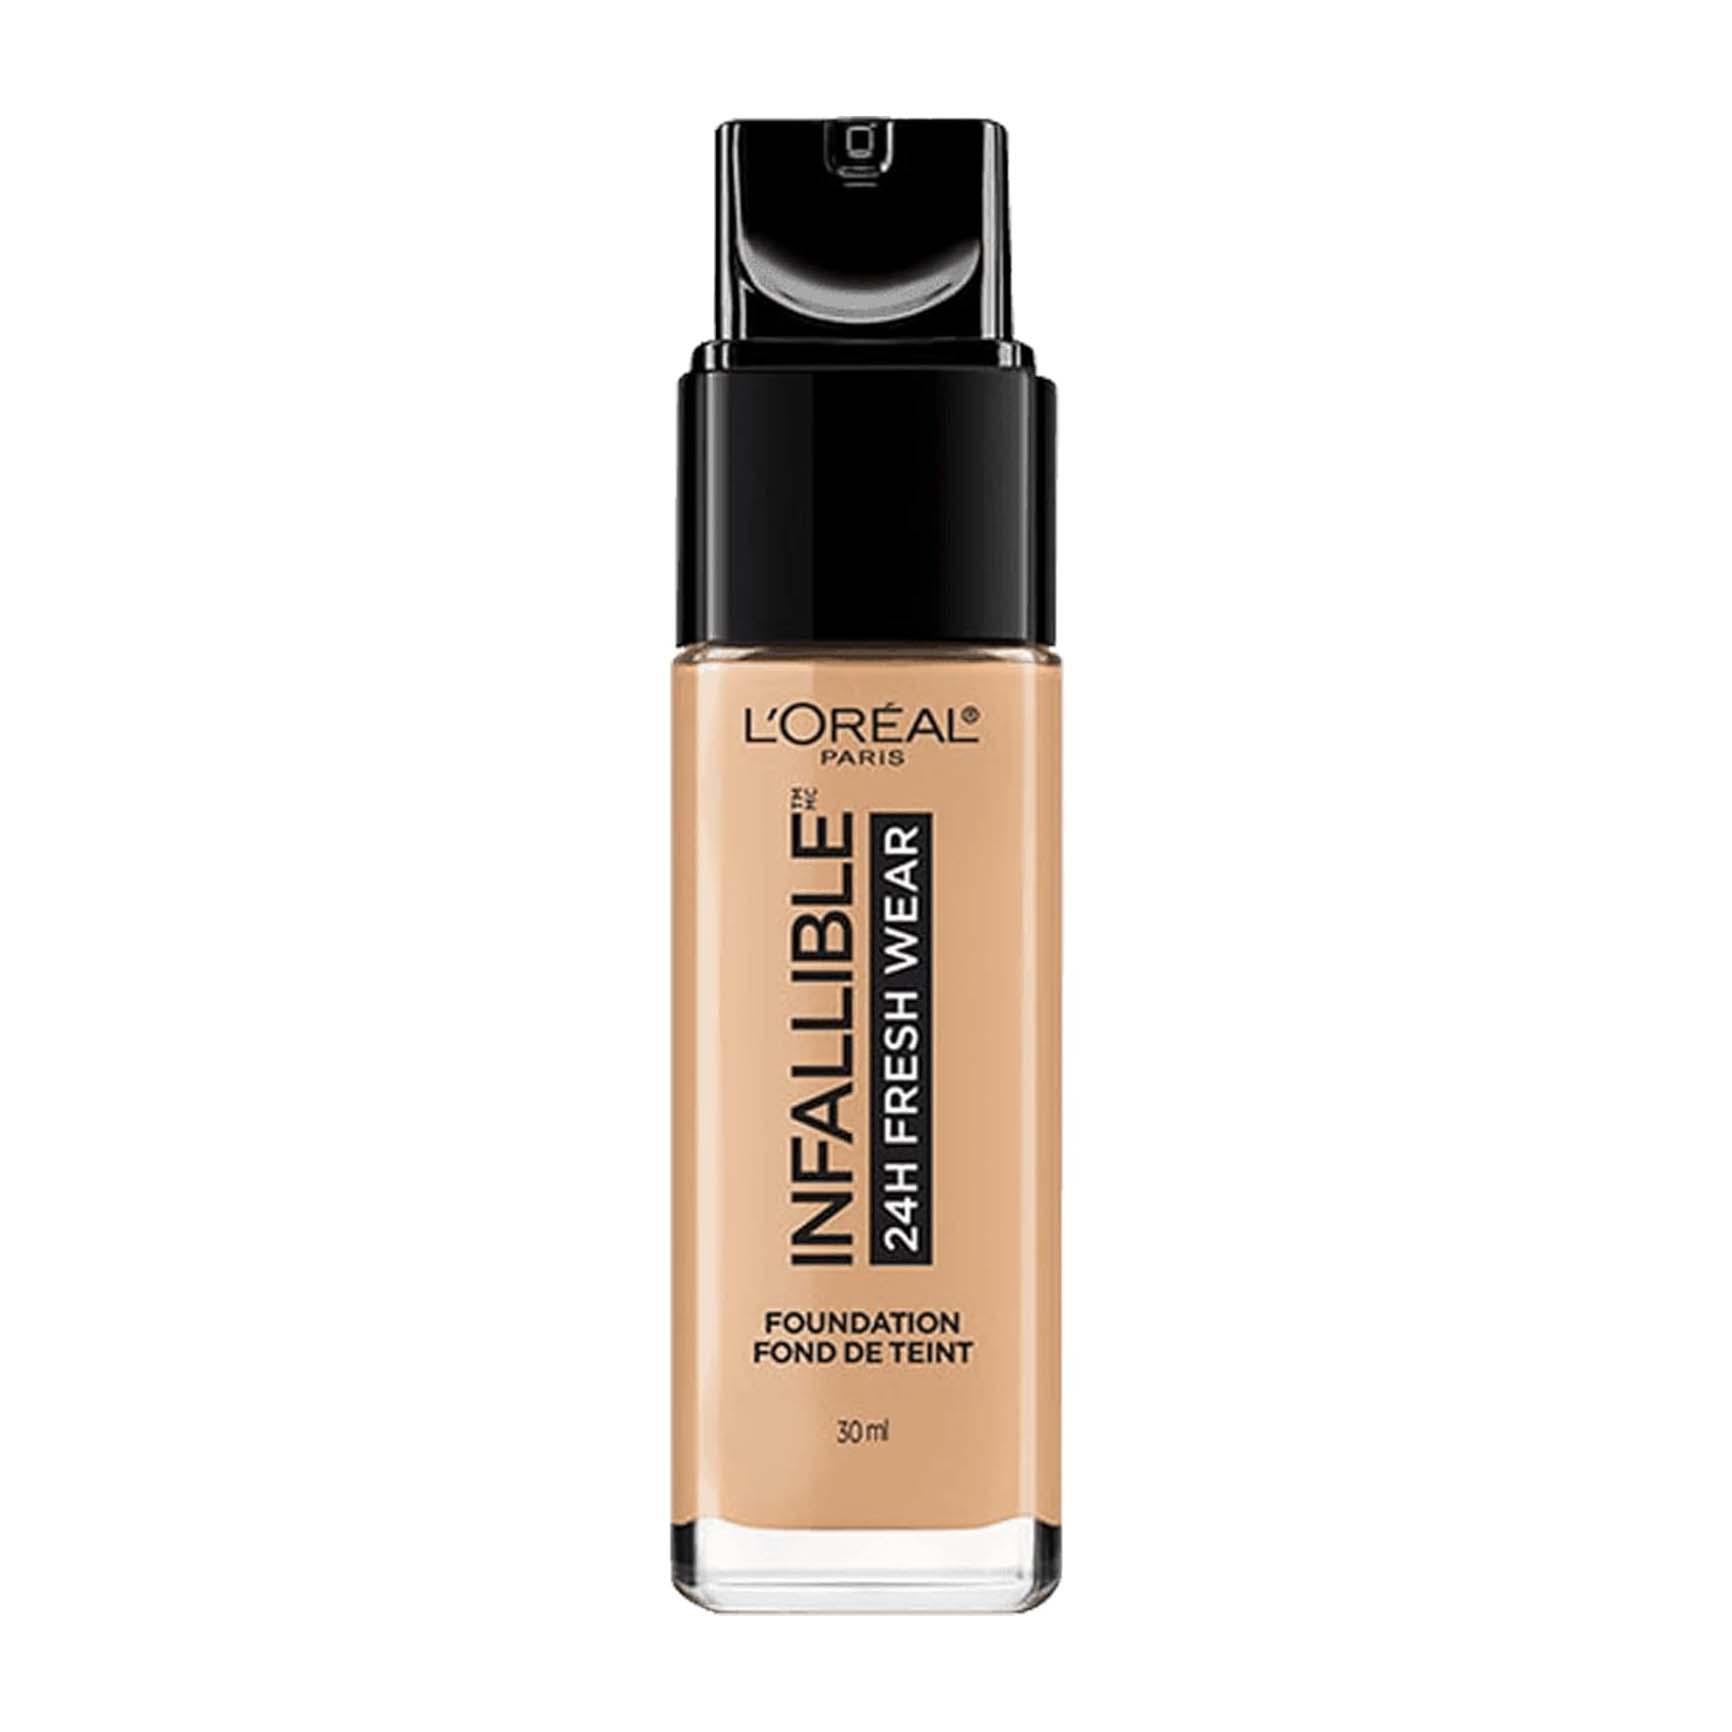 L'Oréal Infallible Fresh Wear 24HR Foundation in the shade natural buff